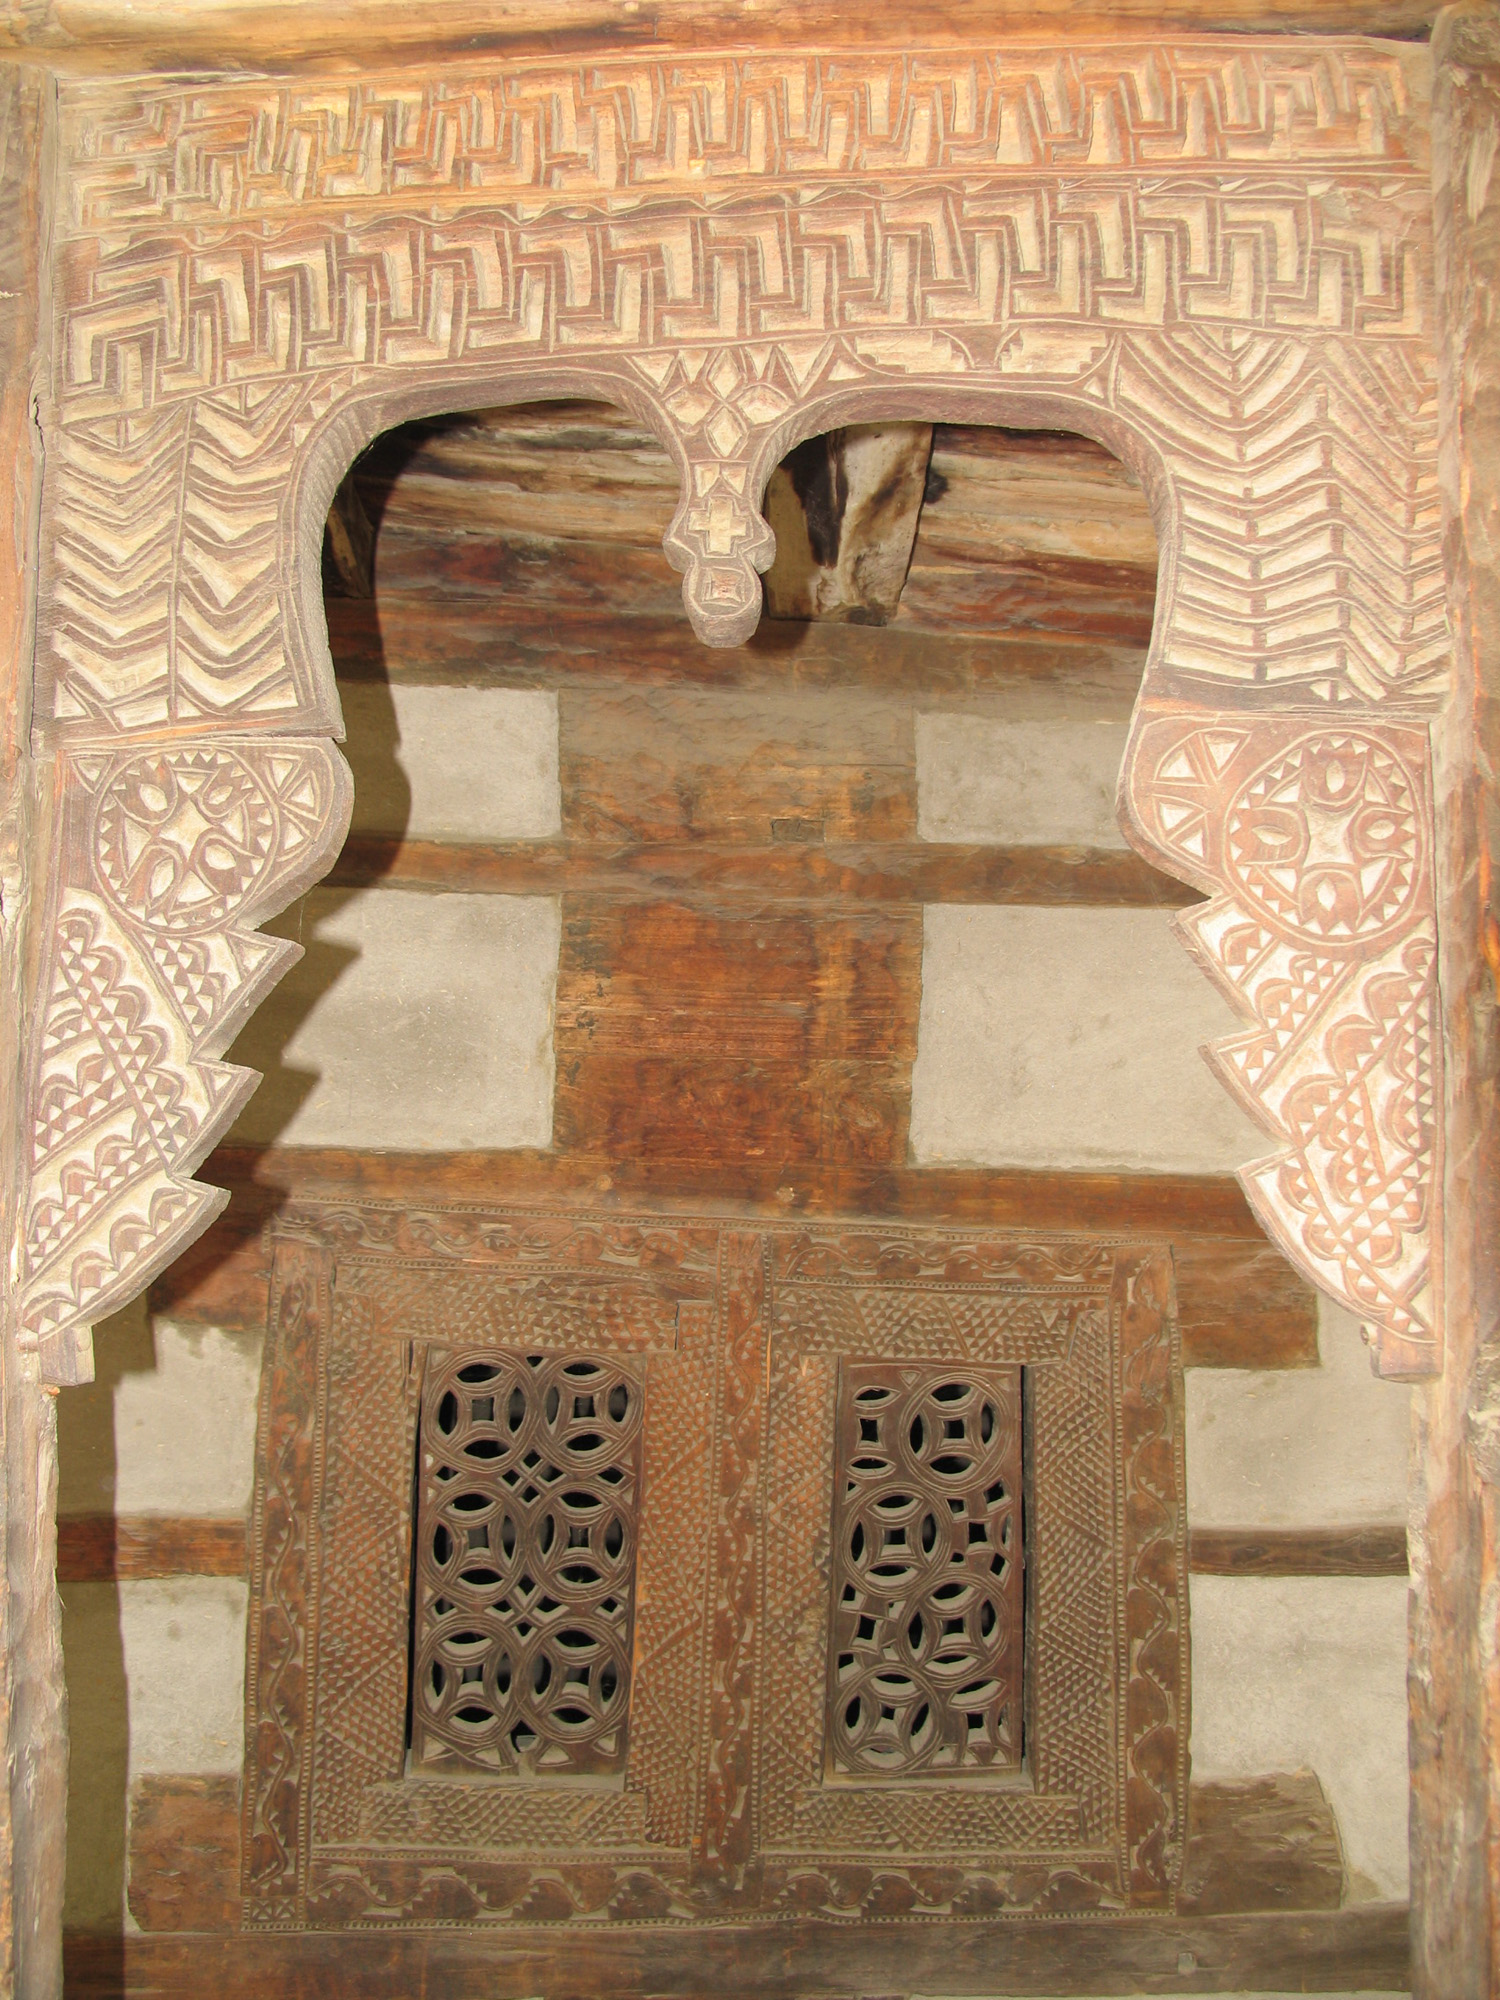 Wooden carving details from Mamorukutz Mosque